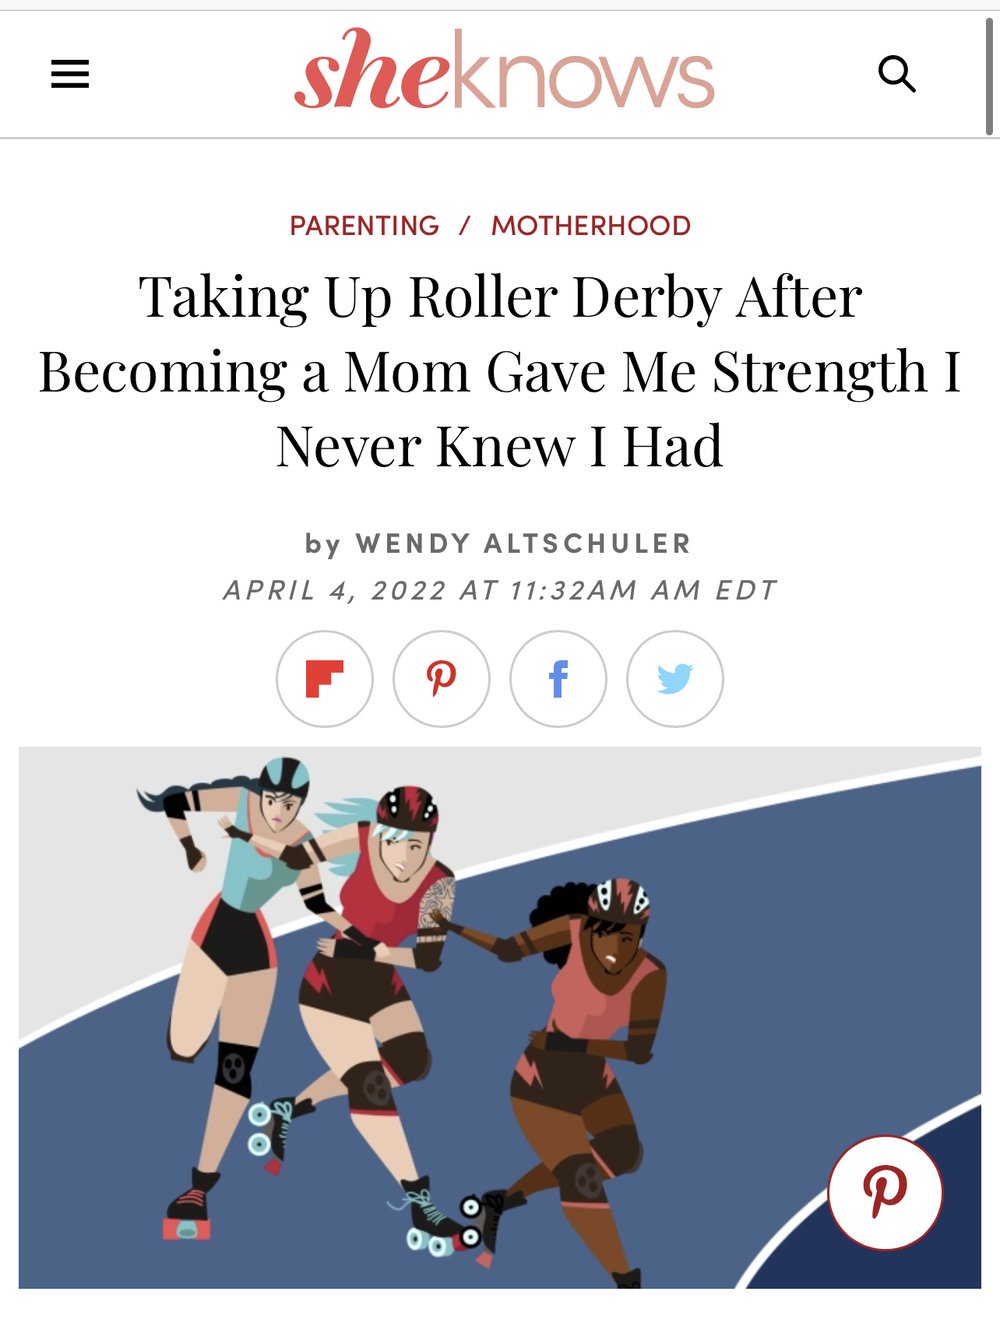 Taking Up Roller Derby After Becoming a Mom Gave Me Strength I Never Knew I Had